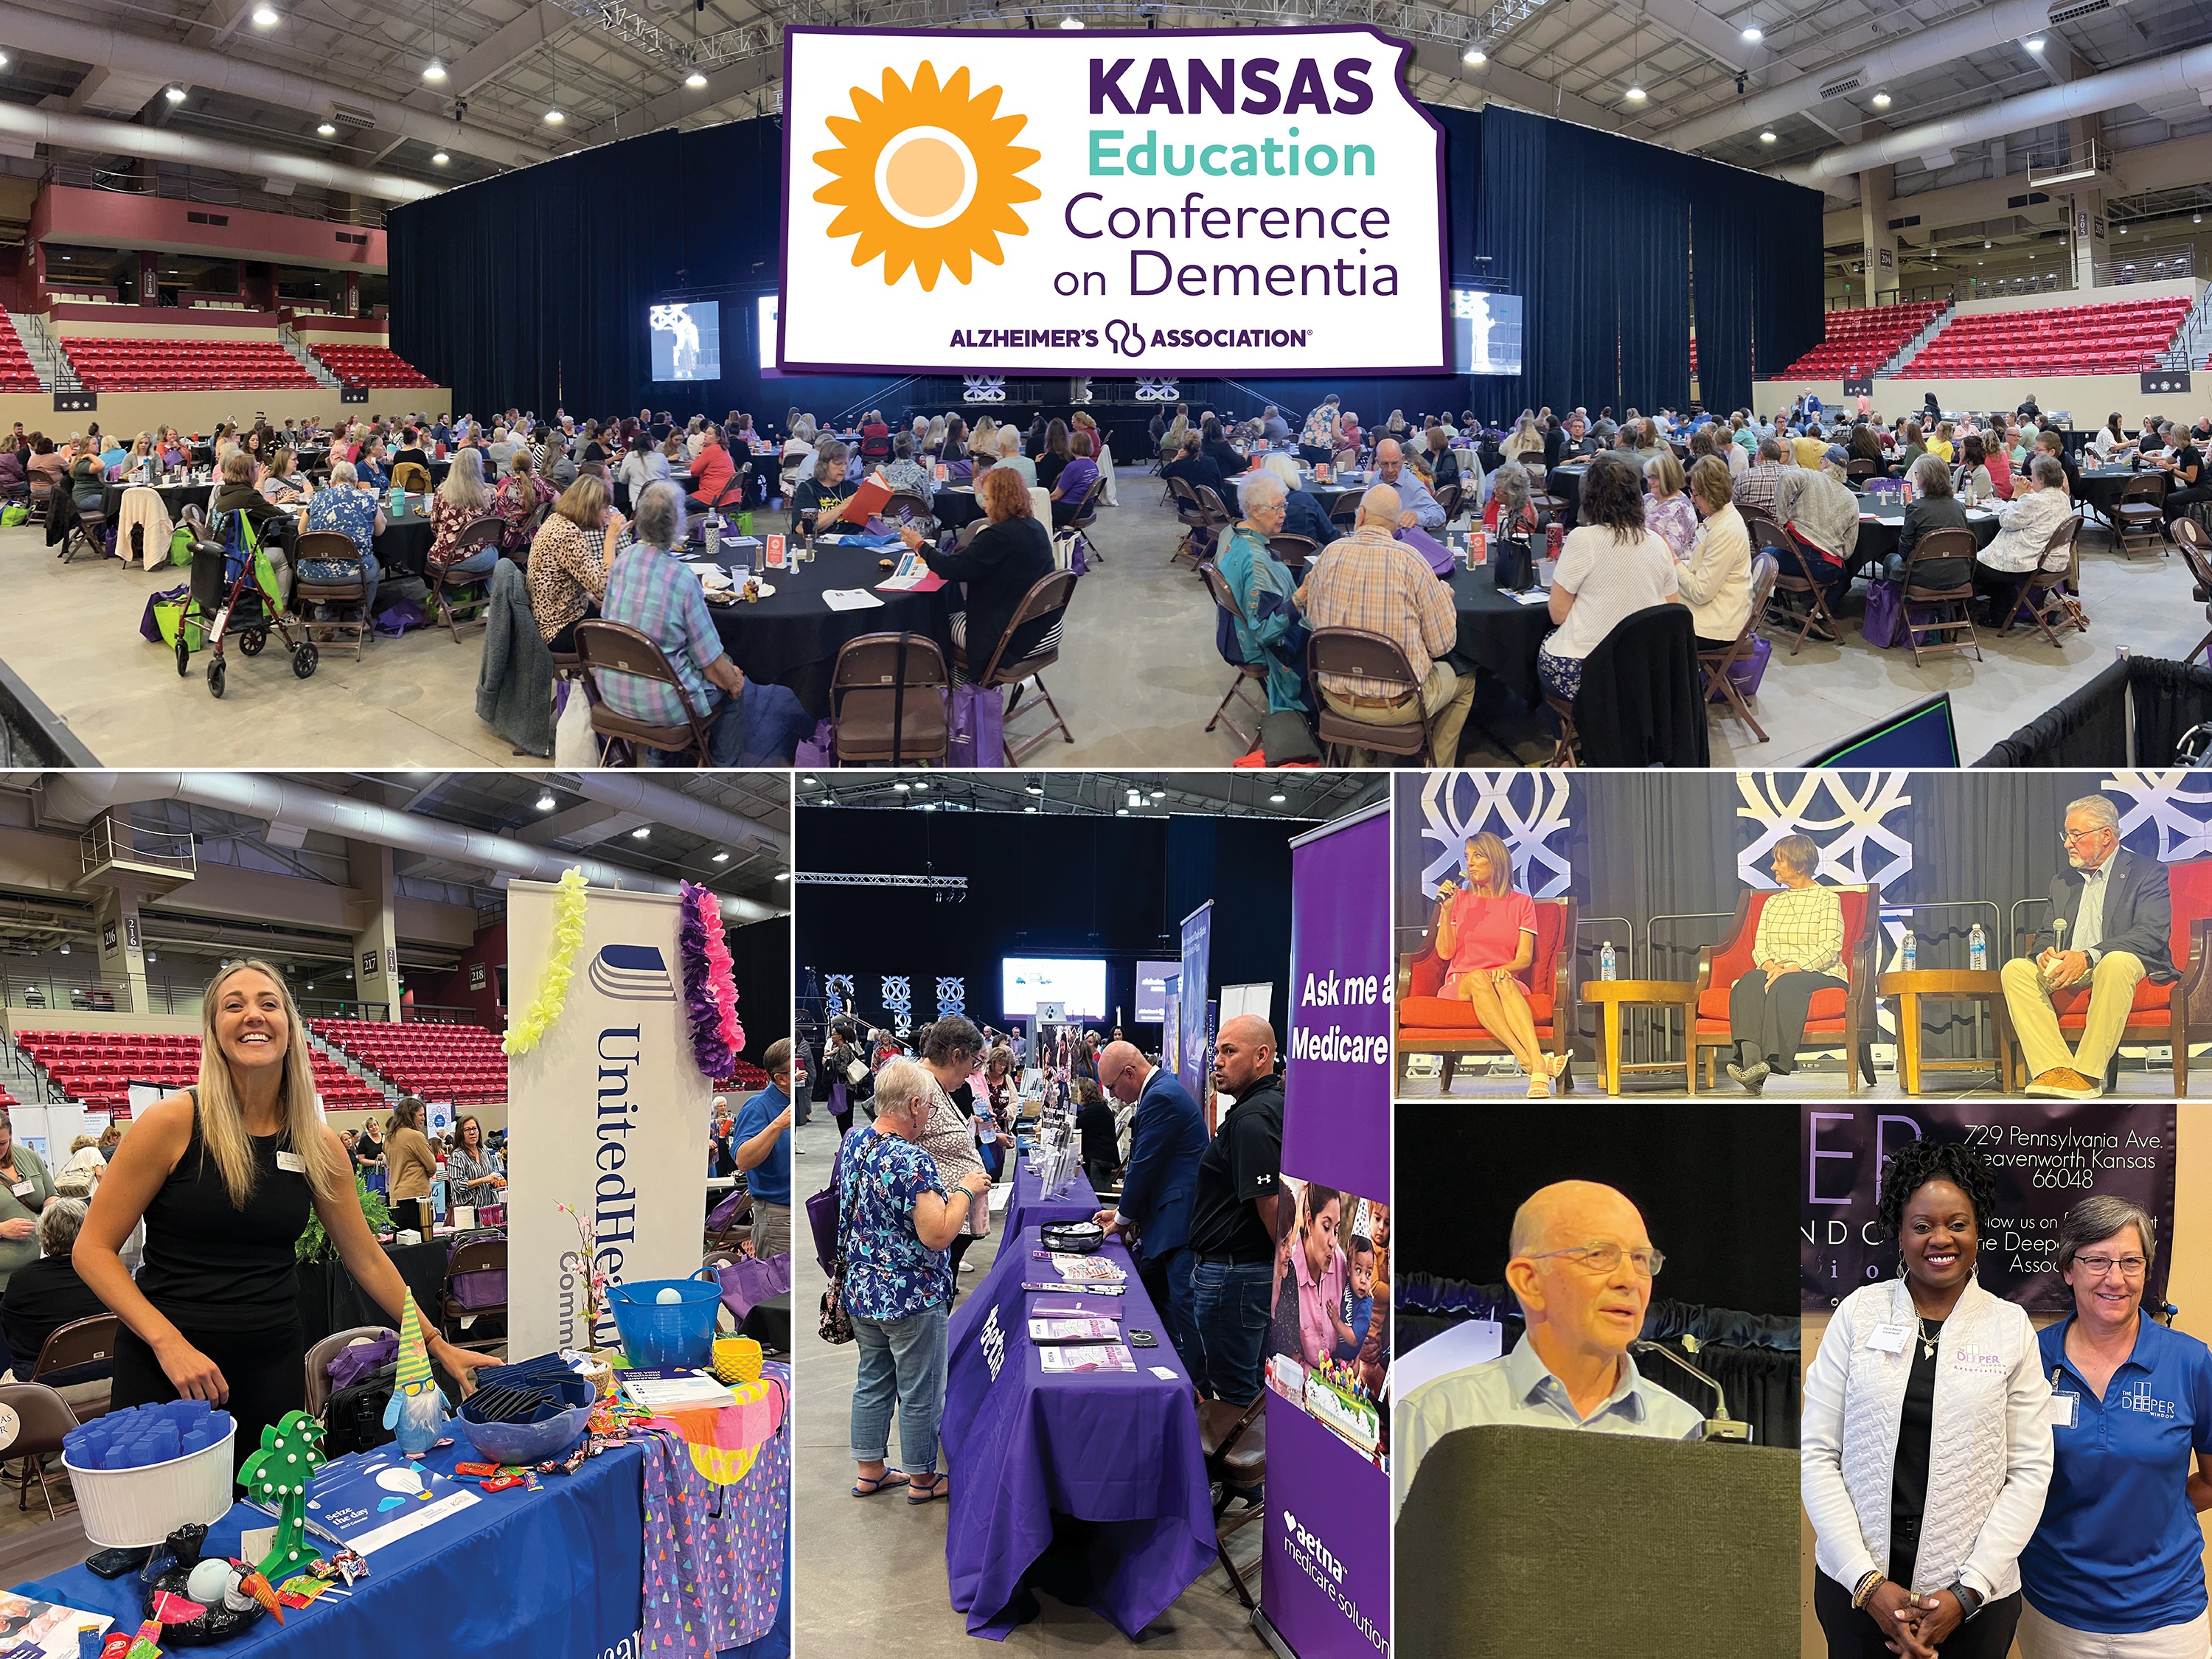 Kansas Education Conference on Dementia picture collage with logo